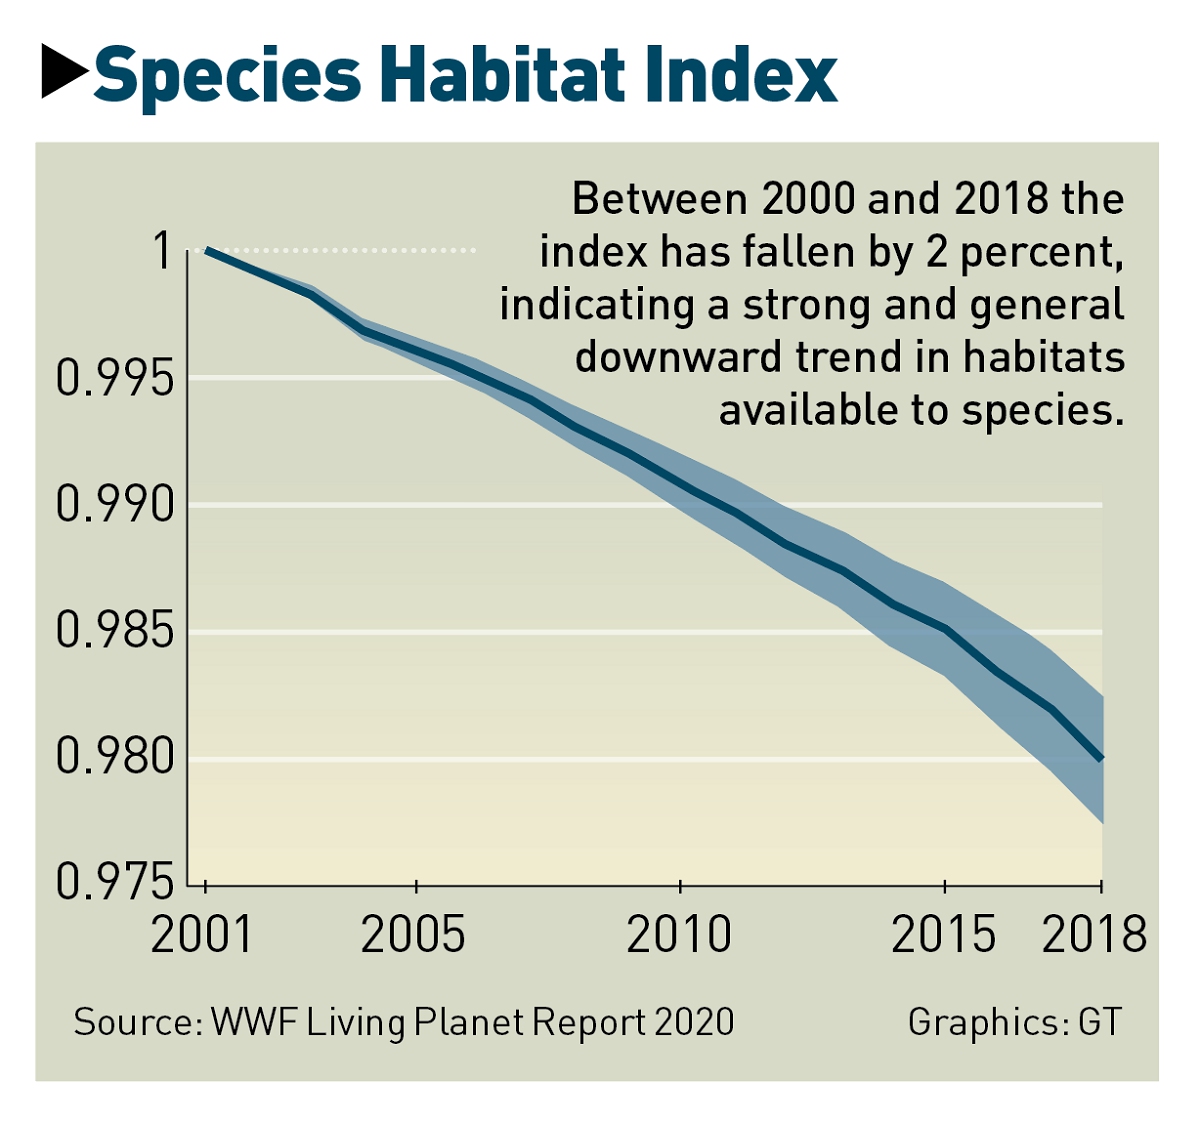 Wild animal populations not declining as feared: study - Global Times